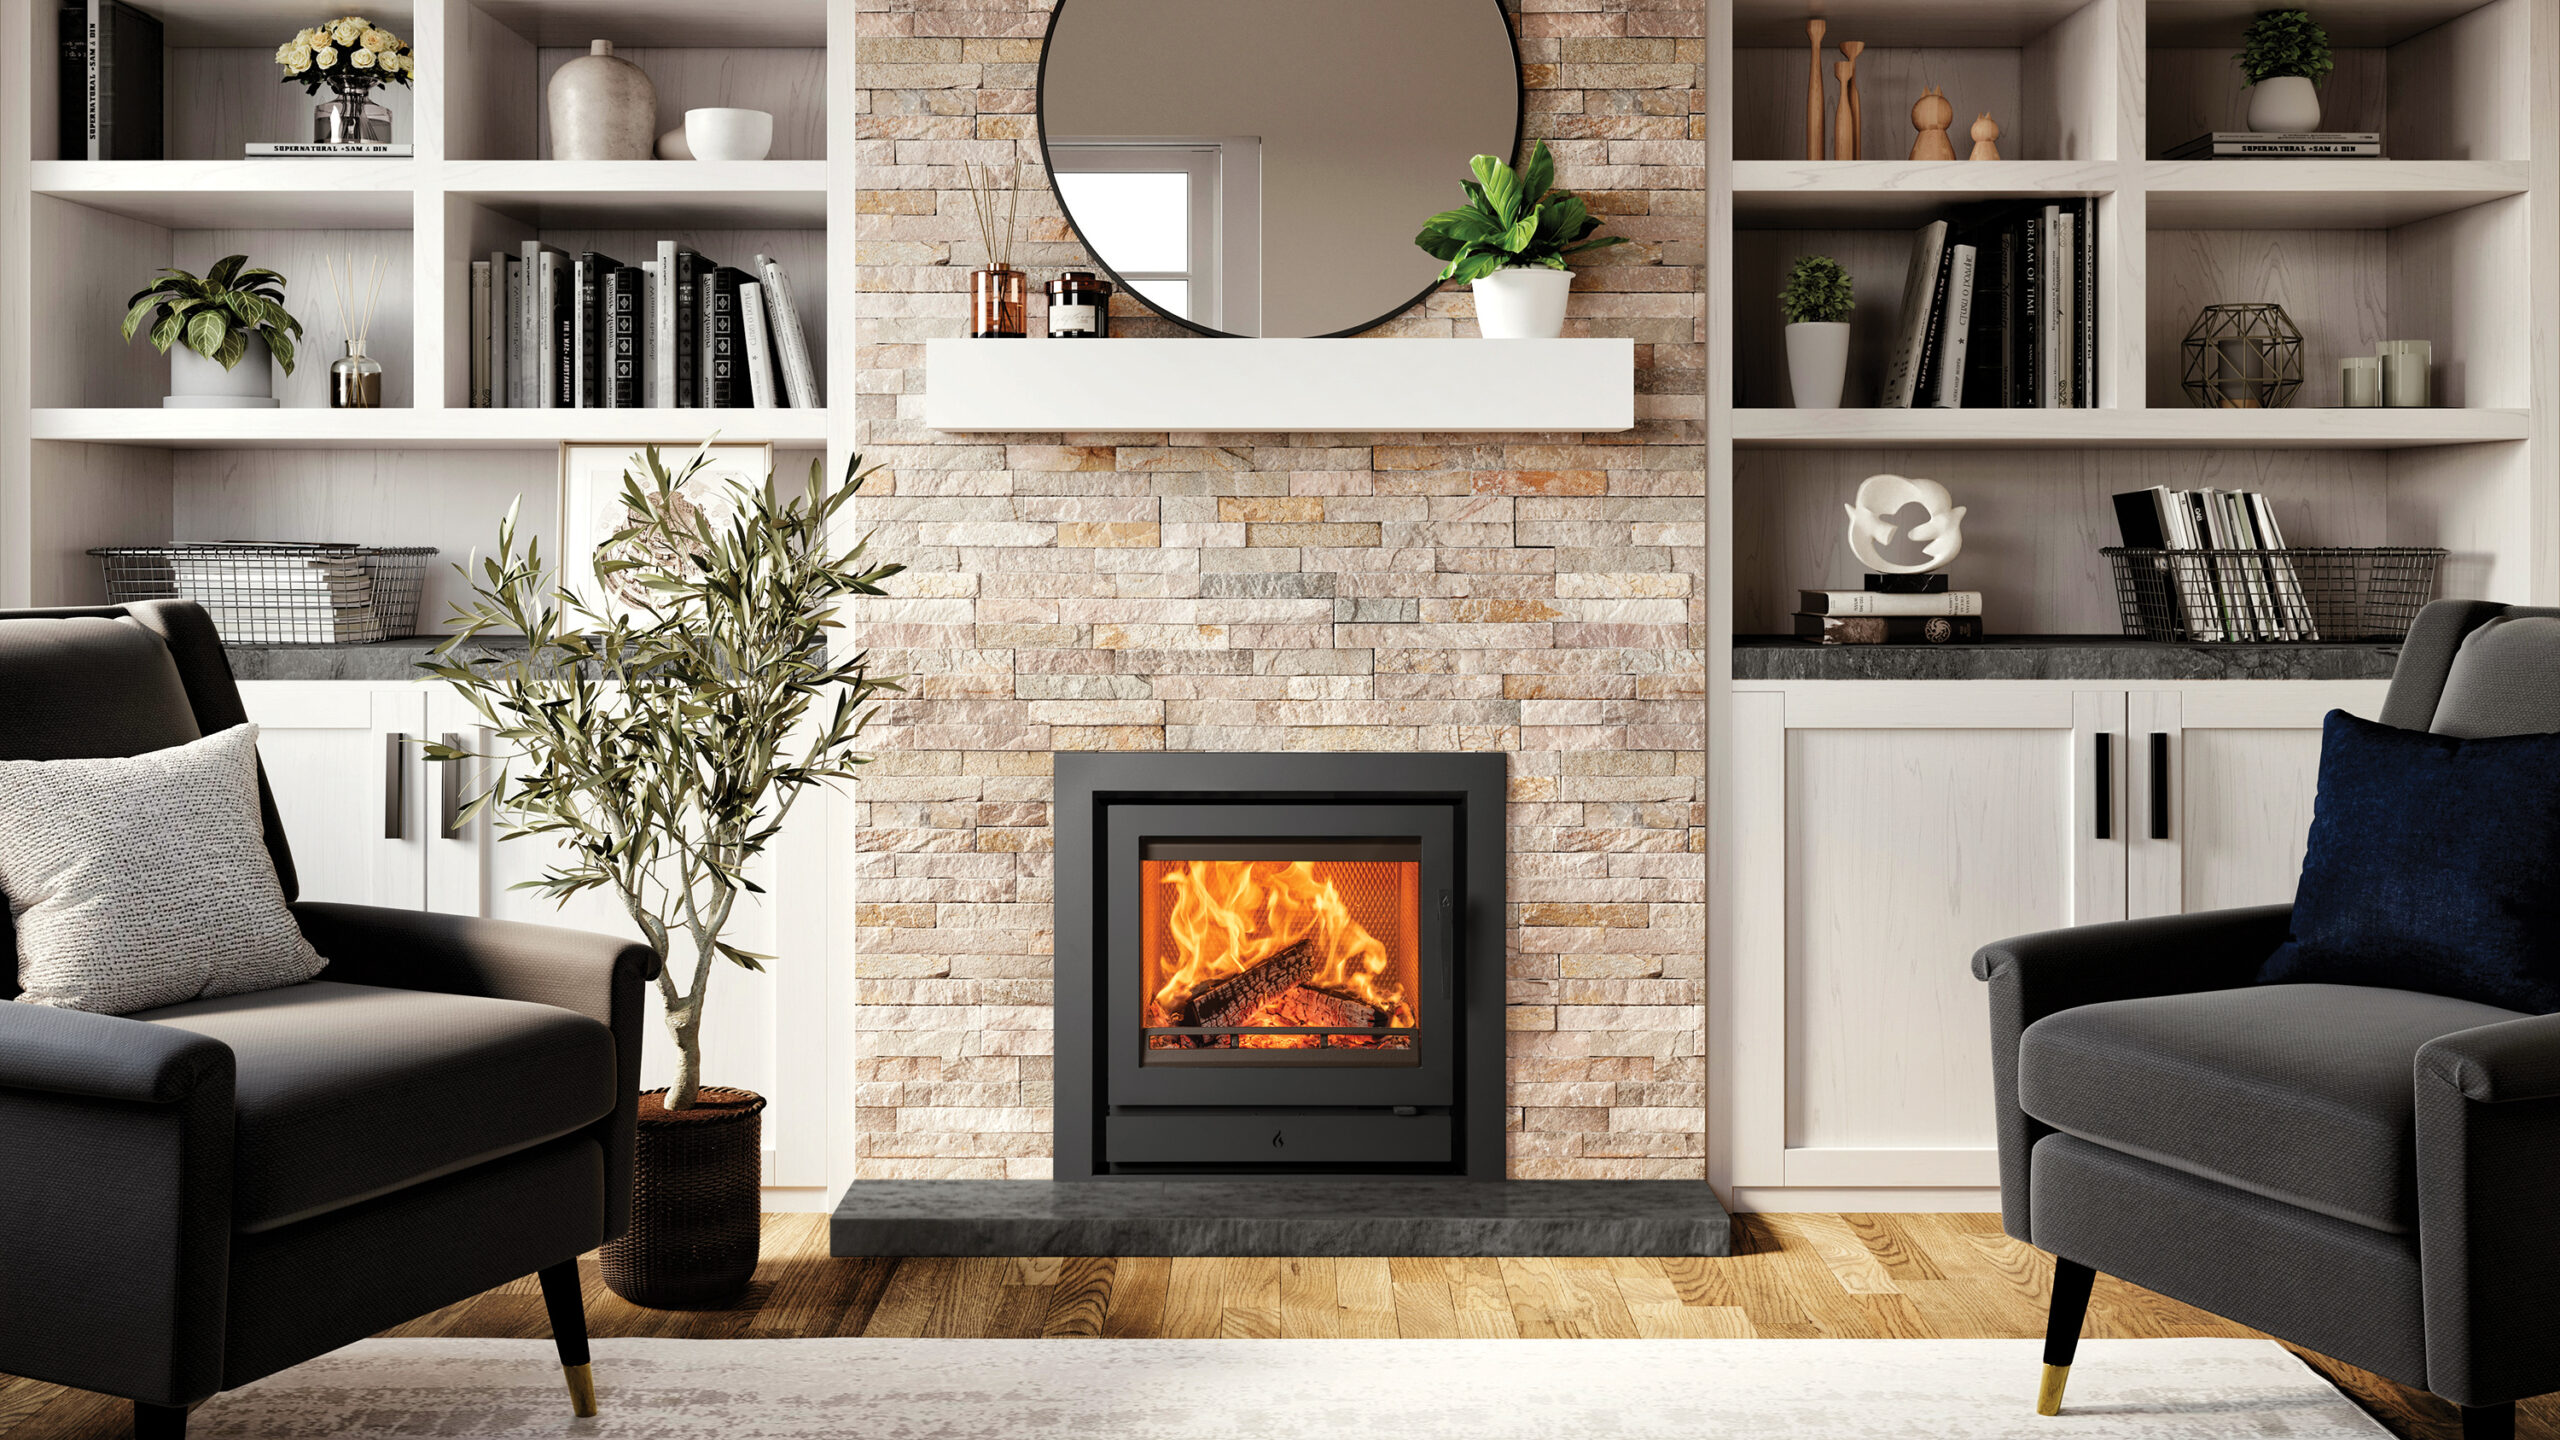  Hearth Mounted Wood Burning Fires